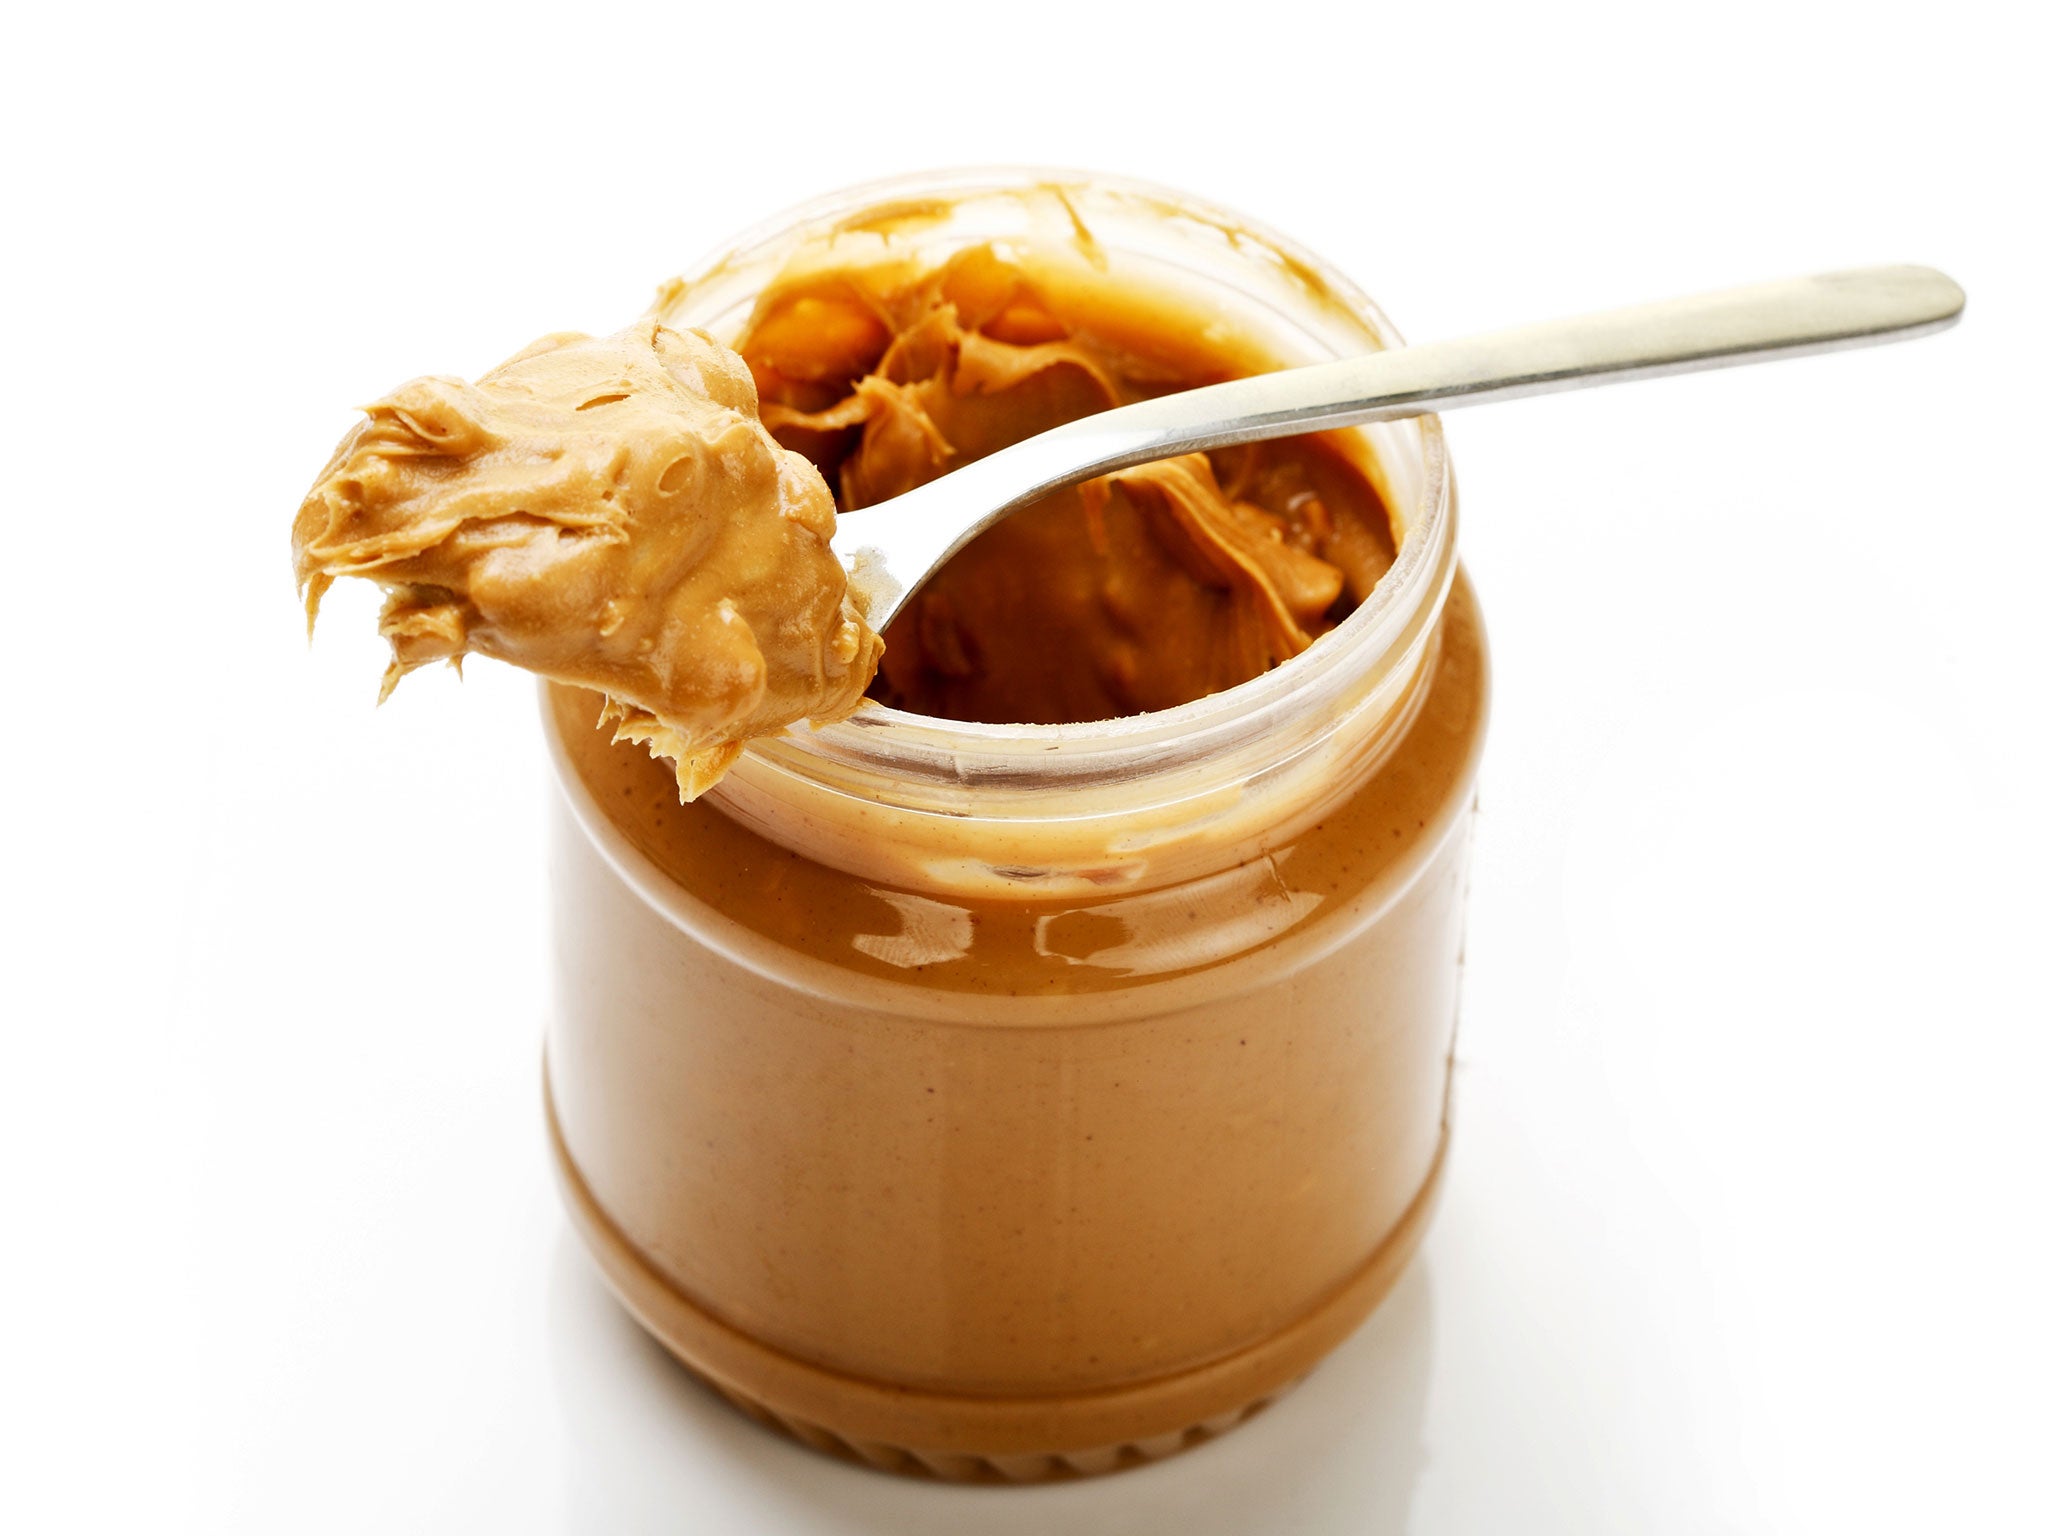 Peanut butter contains salt and trans fatty acids which could inhibit the protective effects